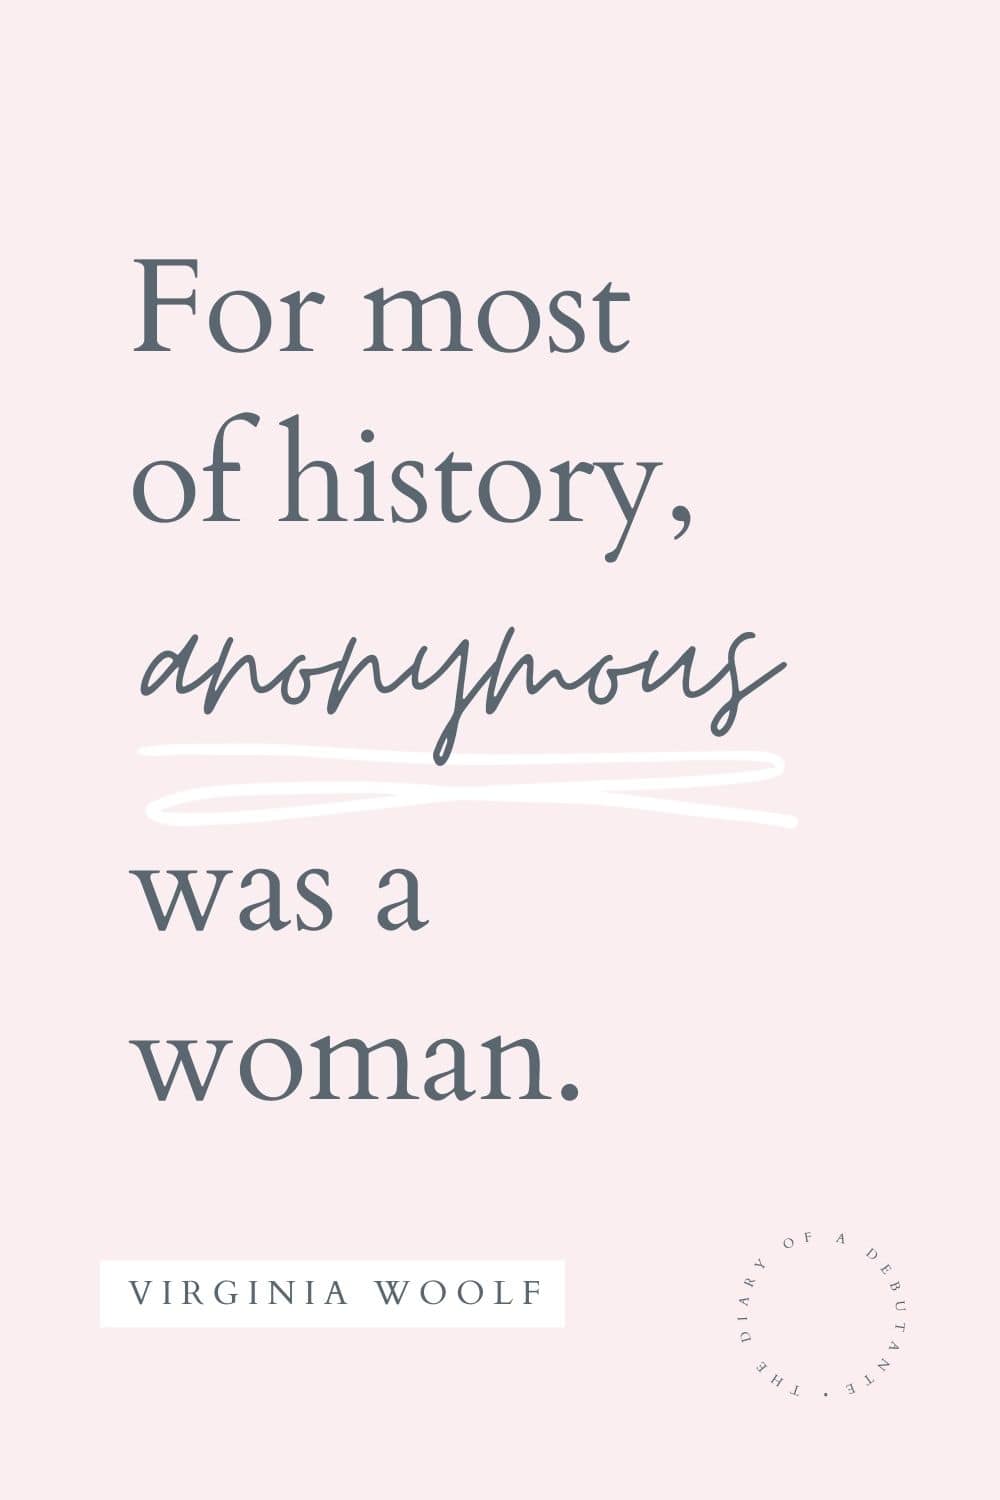 Virginia Woolf anonymous was a woman quote curated by blogger Stephanie Ziajka for Women's History Month on Diary of a Debutante